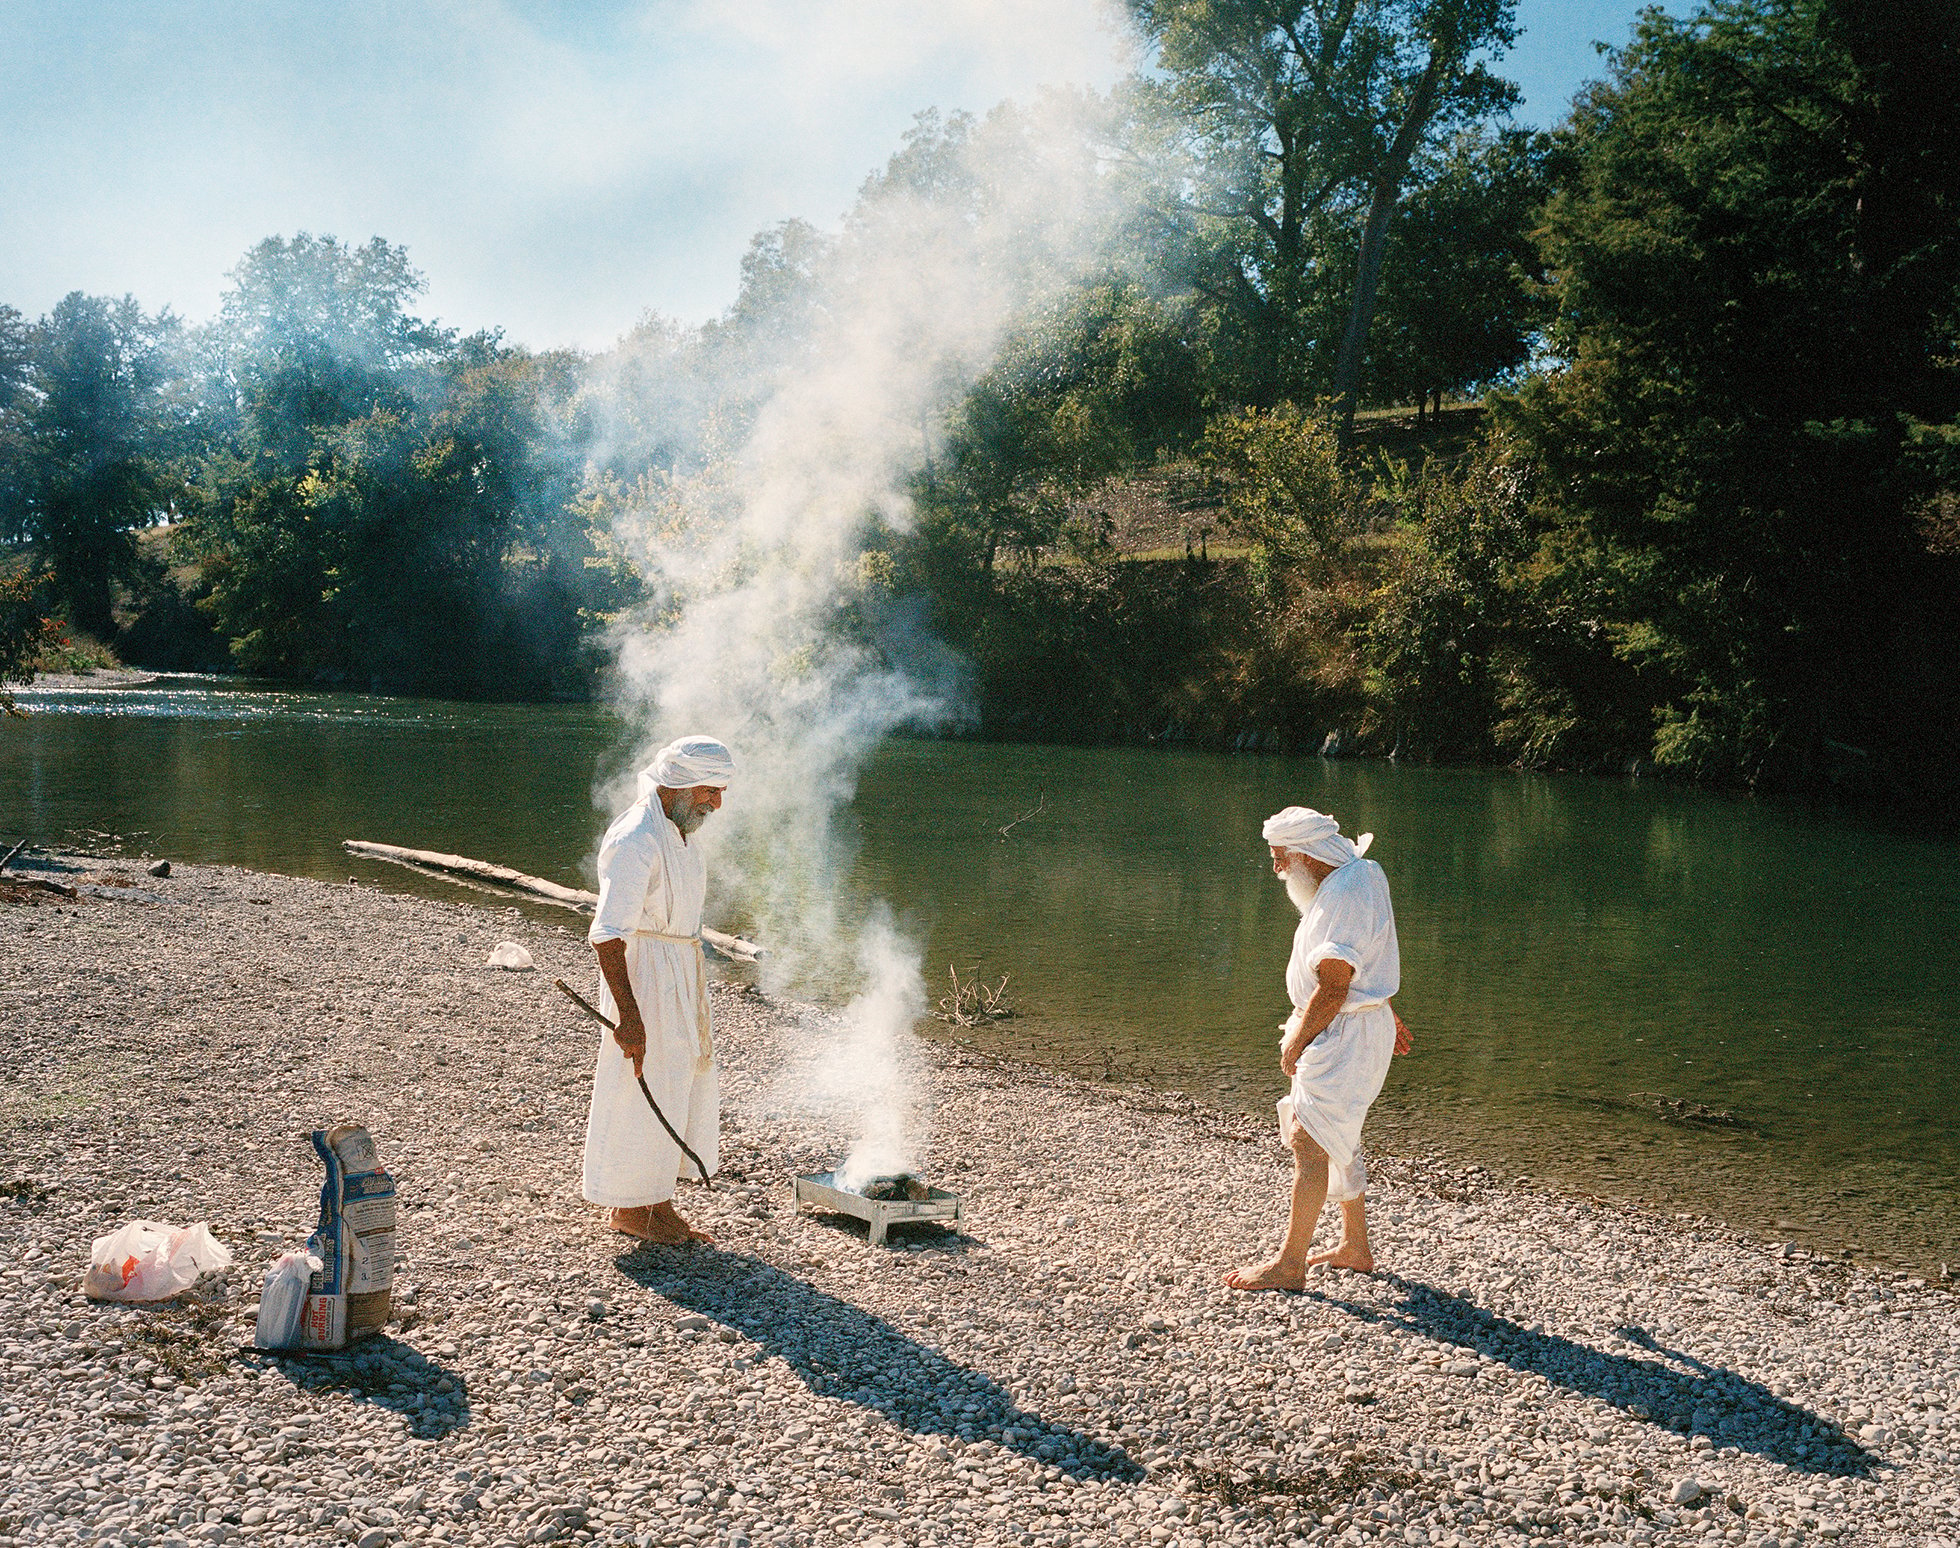 Shahram Ebadfardzadeh, left, and Hormoz Ebadeh Ahvazi prepare a fire during a day of remembrance at the Guadalupe River near San Antonio. They'll eat while praying for the souls of people who have died.